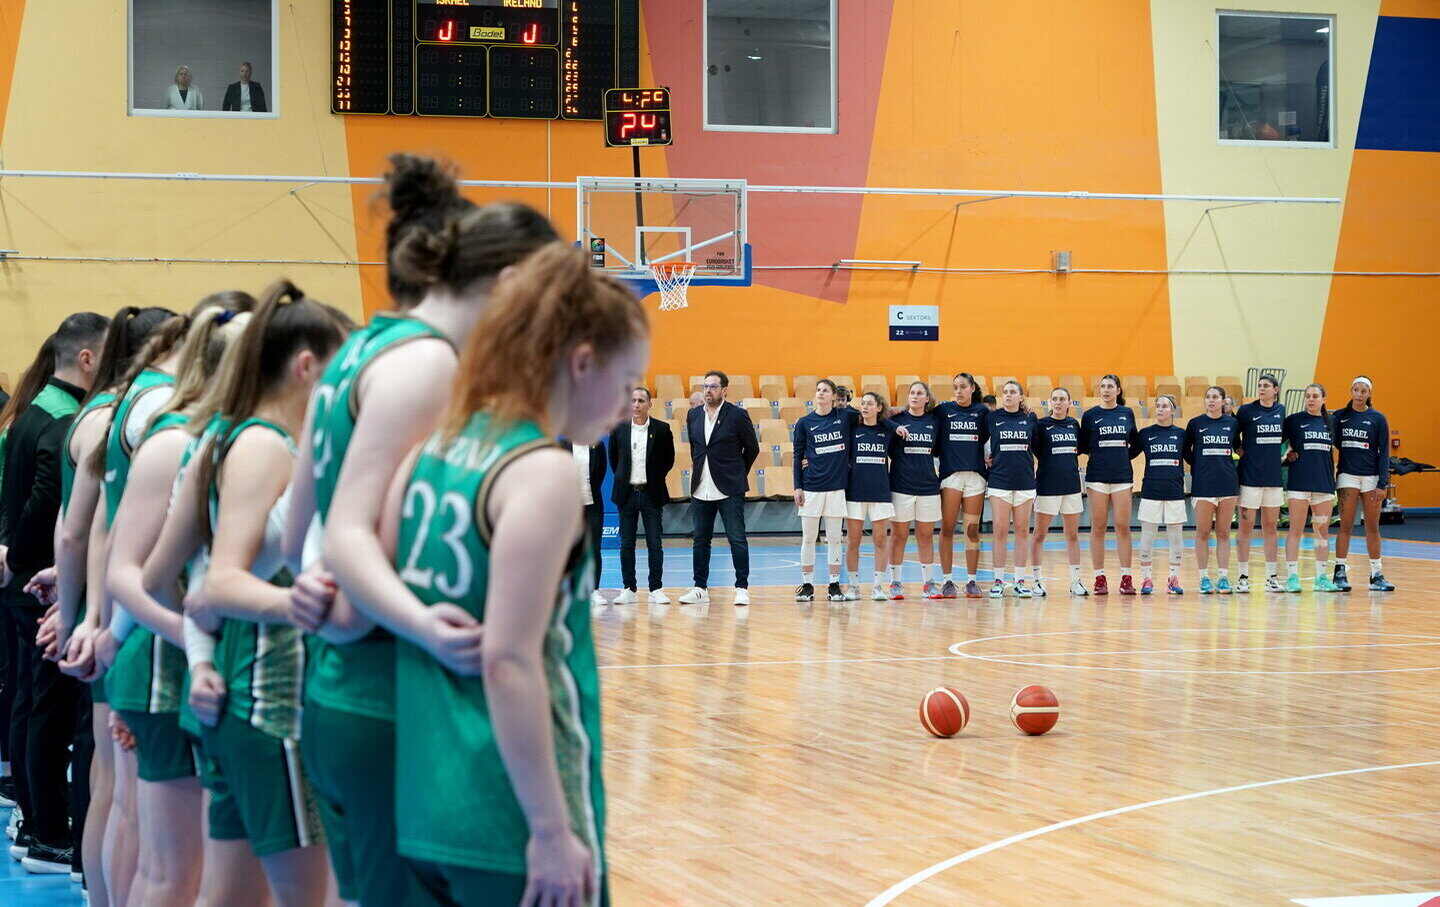 The Ireland team stand by their bench as the Israel team stand on the court as the teams stand for their national anthems before the FIBA Women's EuroBasket Championship Qualifier match between Israel and Ireland at the Rimi Olympic Centre in Riga, Latvia.